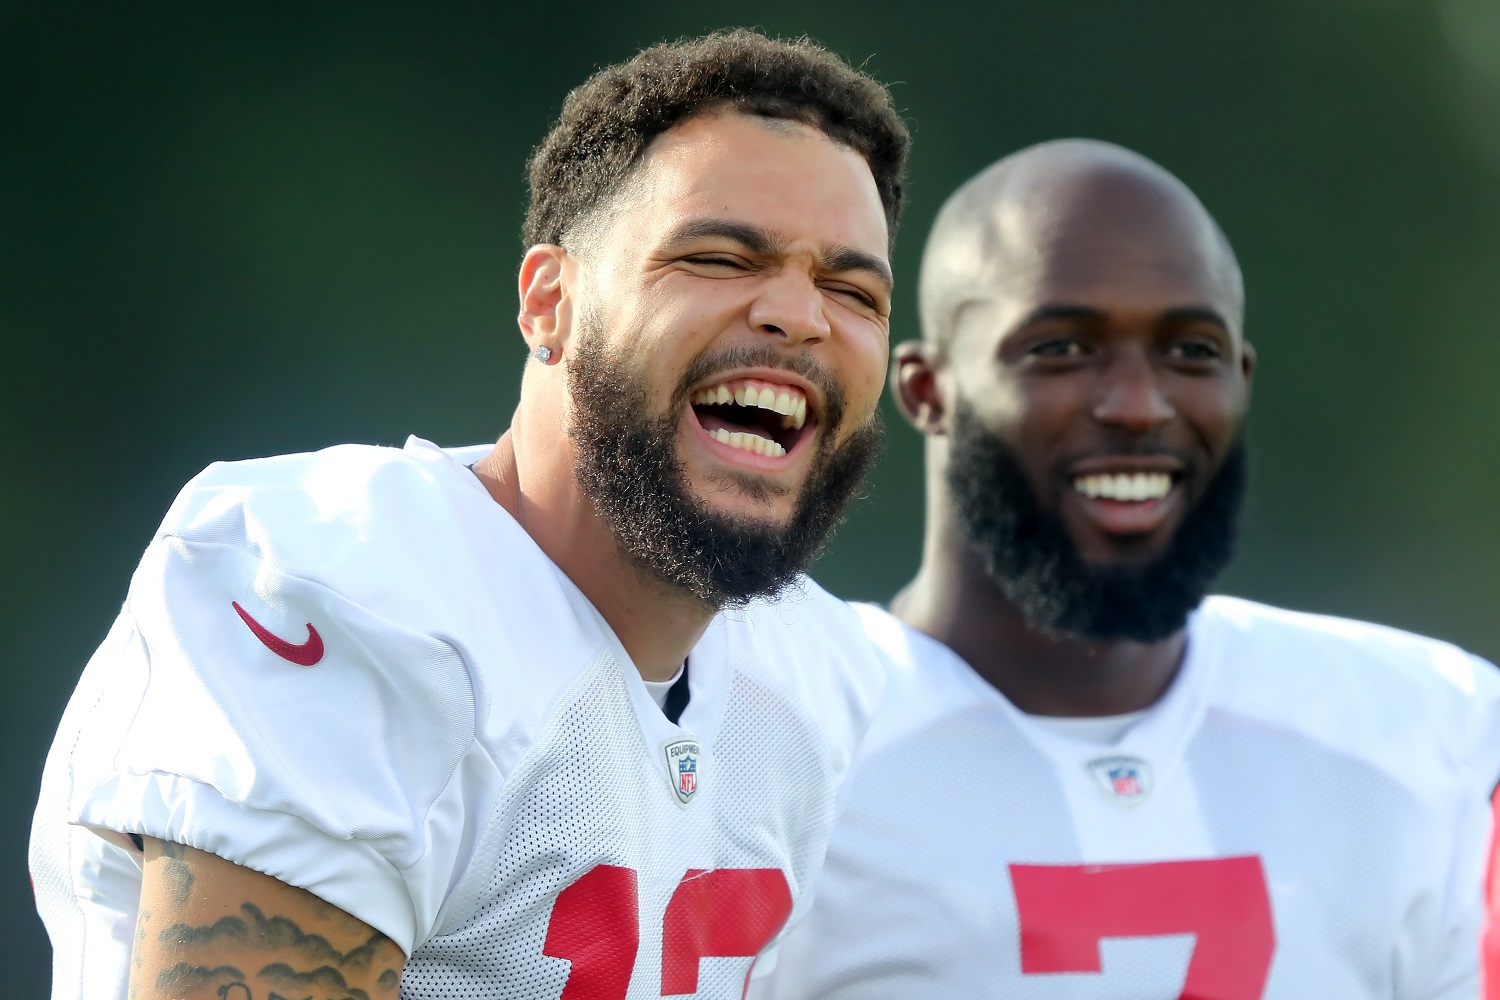 Mike Evans has a laugh as Leonard Fournette smiles in background during the Tampa Bay Buccaneers' training camp on July 27, 2021.